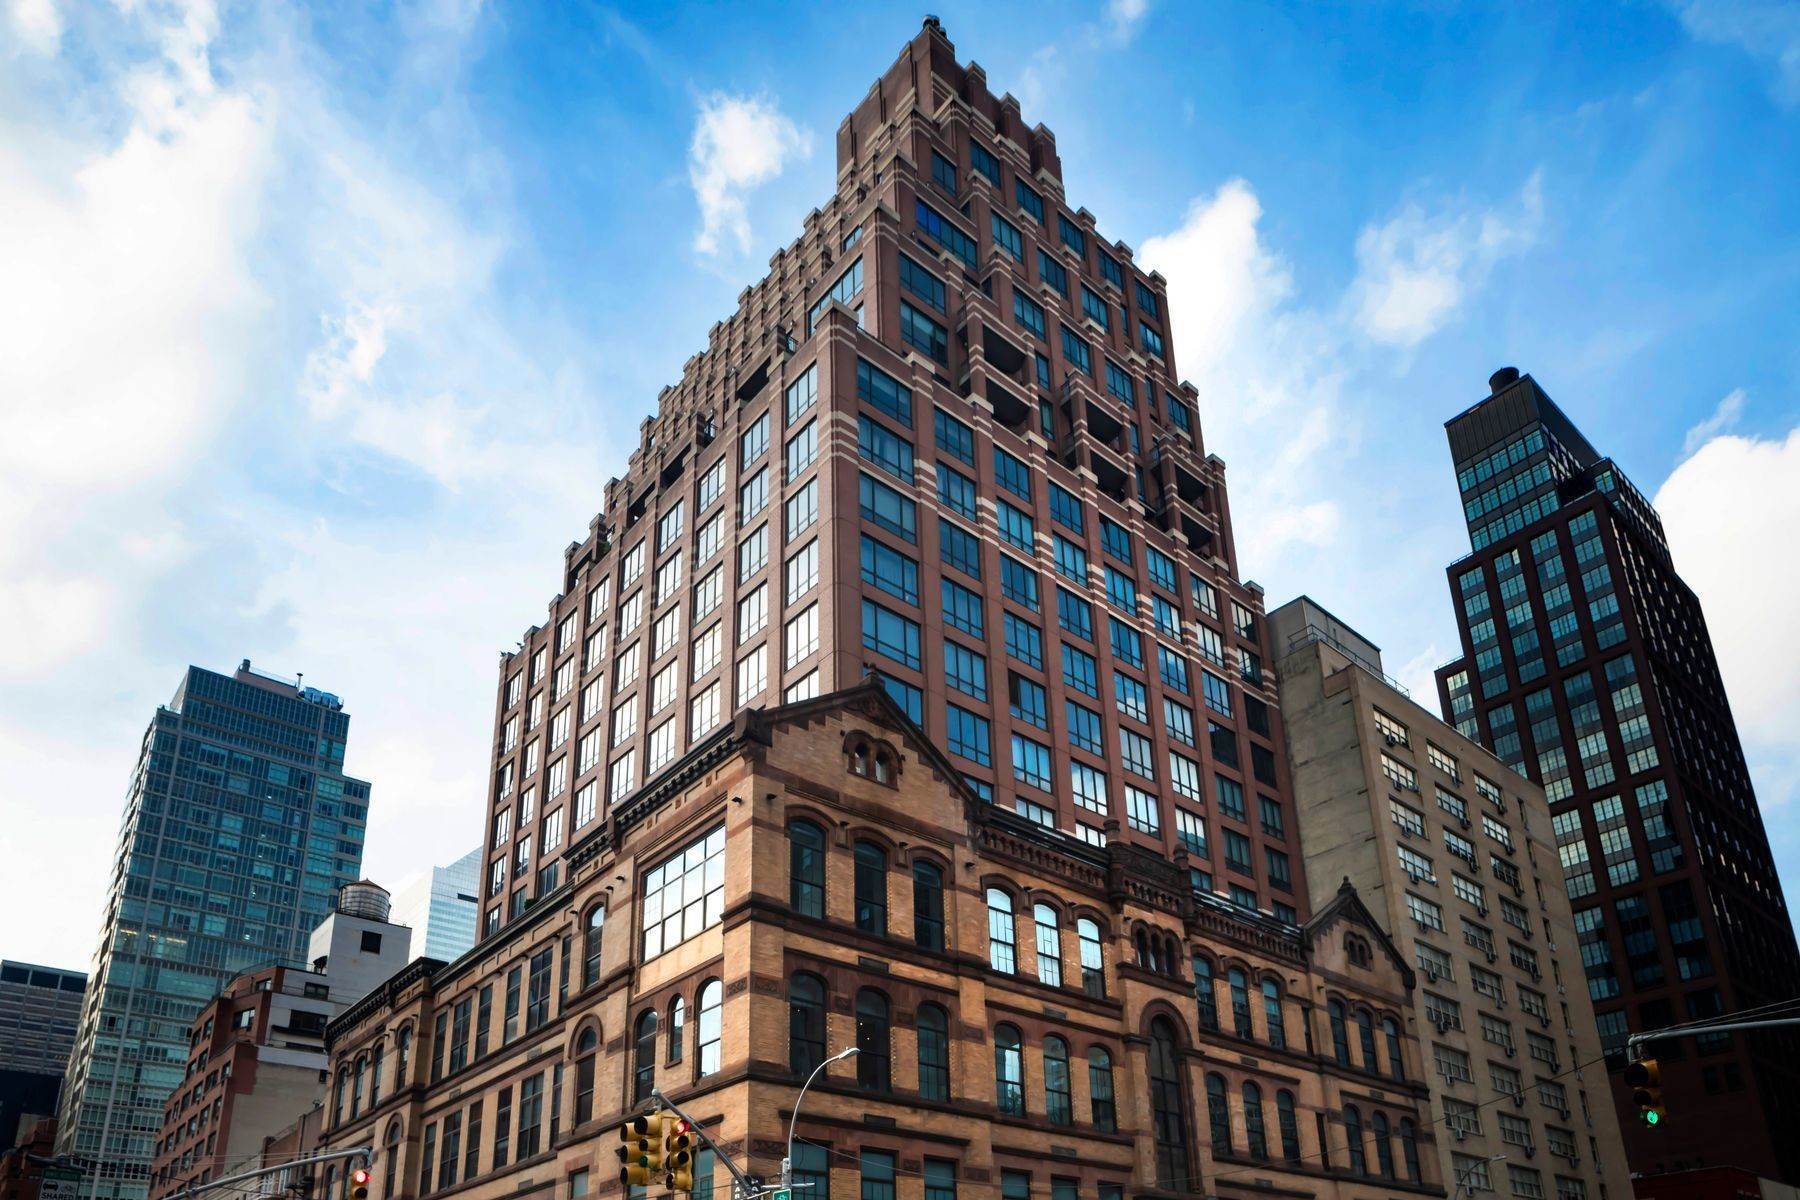 The Beekman Regent building at 351 East 51st Street, Turtle Bay, Manhattan, NY 10022